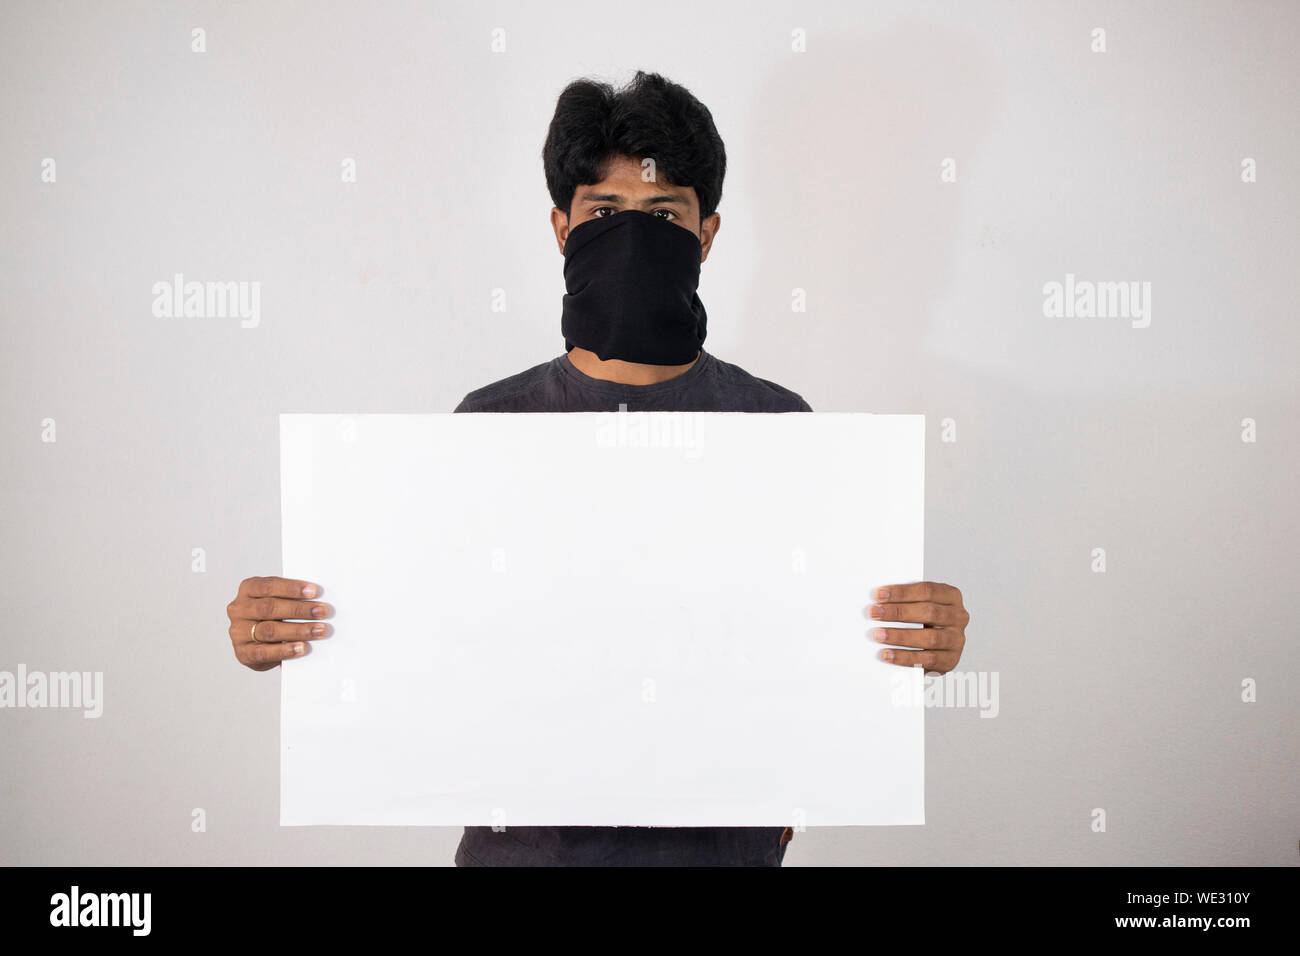 Concept of protest showing with Man standing by covering the face with black cloth and holding Empty banner, placard on isloated background. Stock Photo